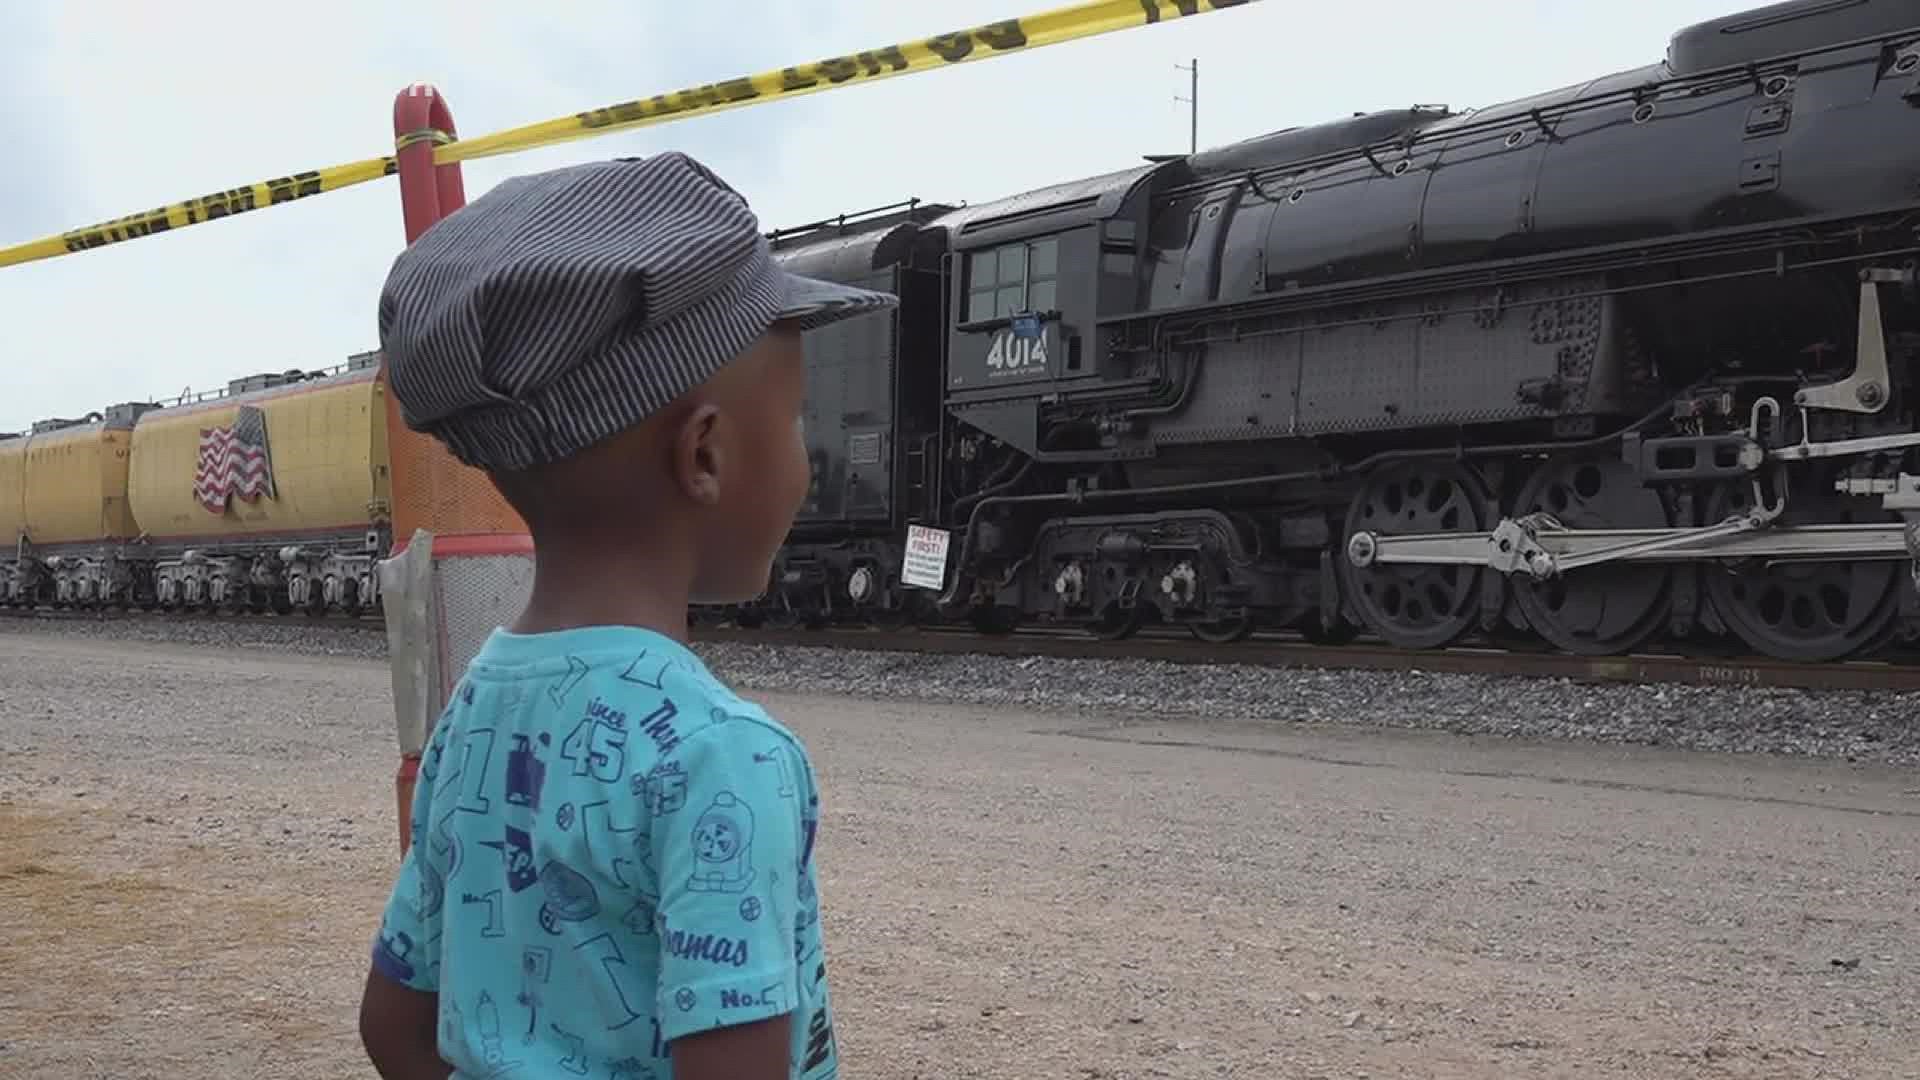 Hundreds of Southeast Texans flocked to see the train Wednesday afternoon.